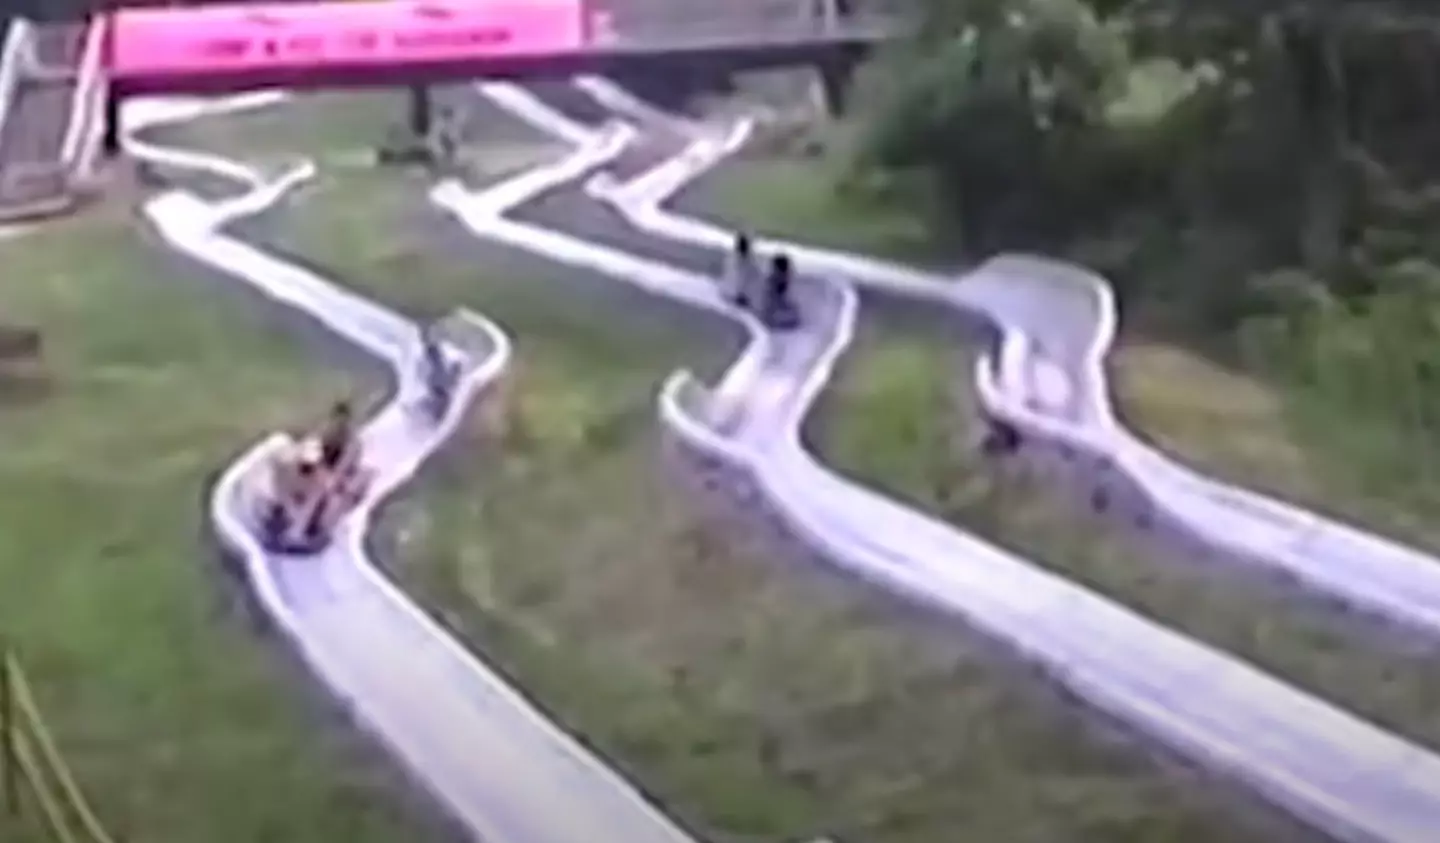 The Alpine Slide was responsible for many head injuries.